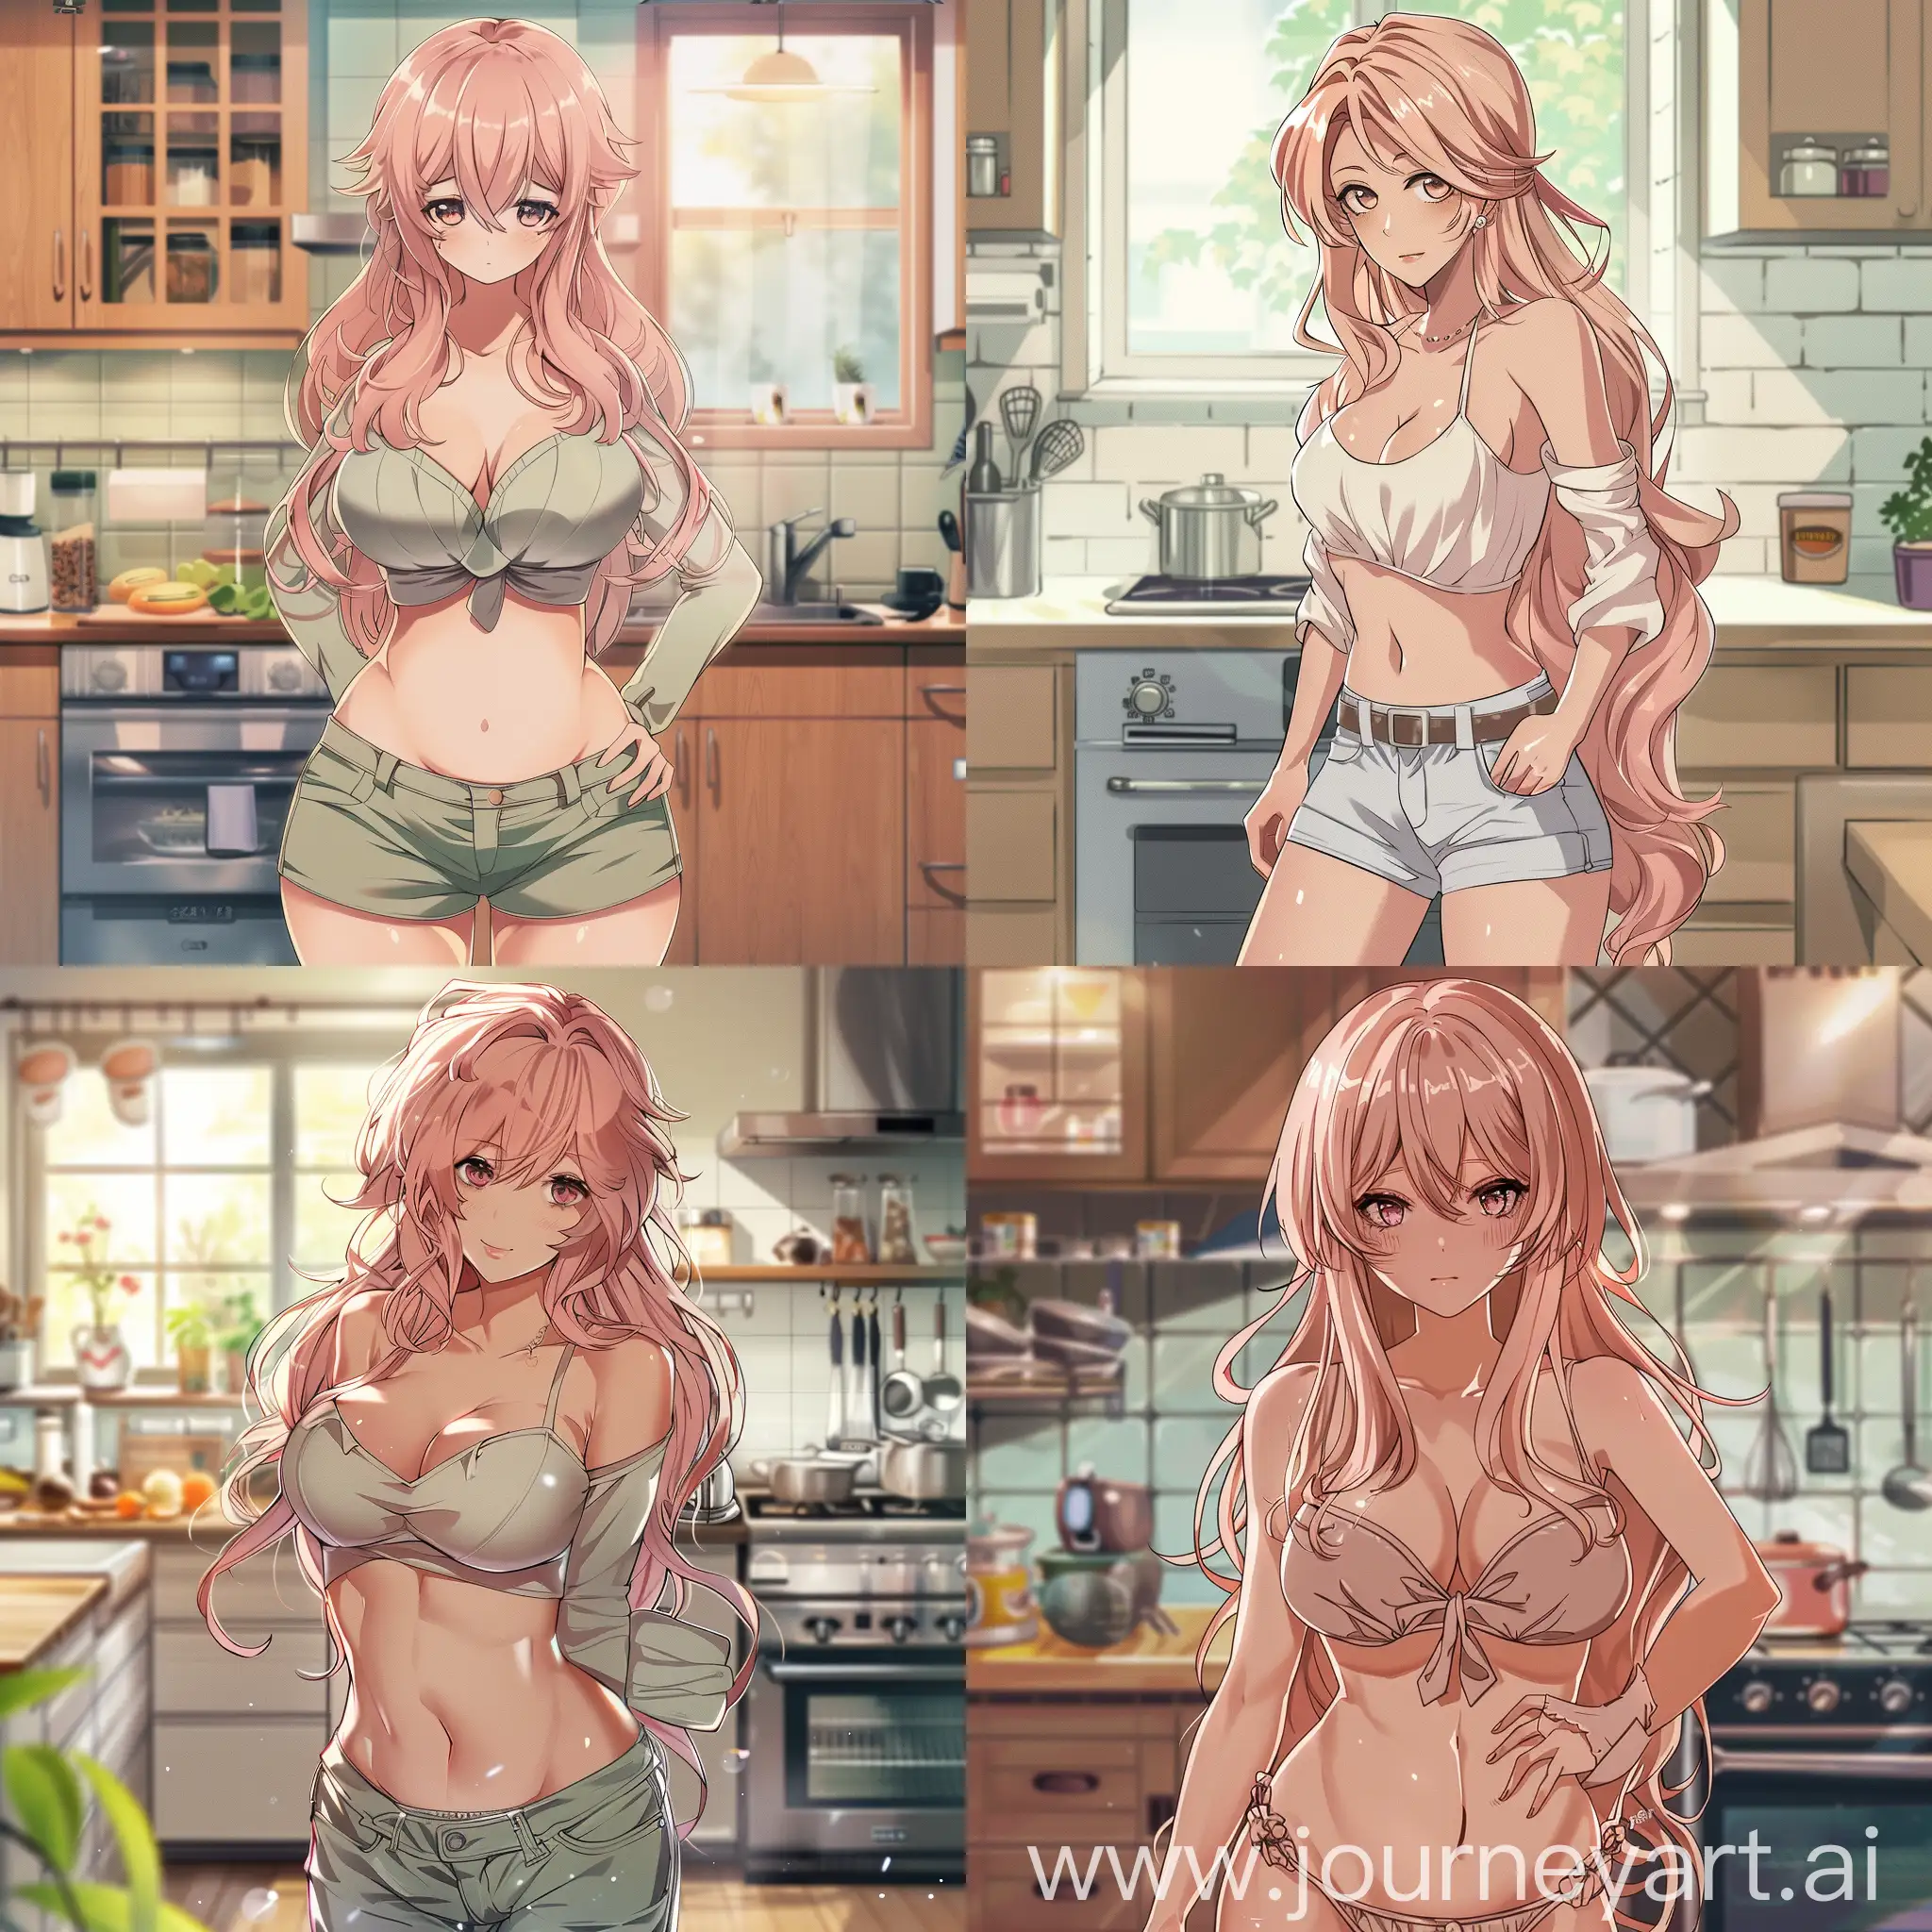 Warm-Anime-Kitchen-Scene-with-Motherly-Figure-in-Baby-Pink-Hair